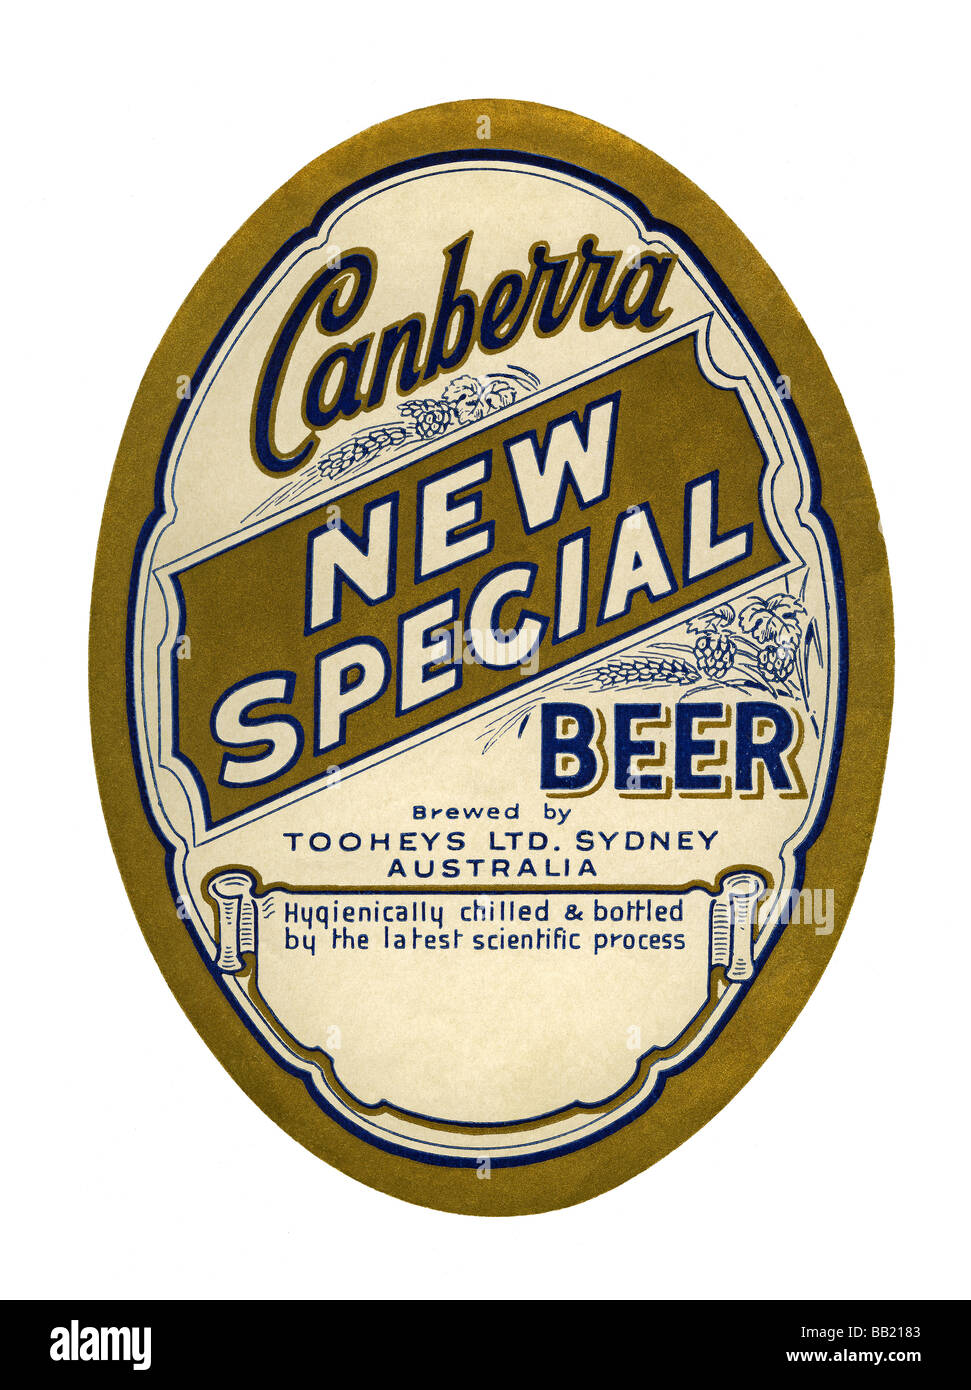 Old Australian beer label for Canberra New Special Beer, brewed Sydney, New South Wales Stock Photo